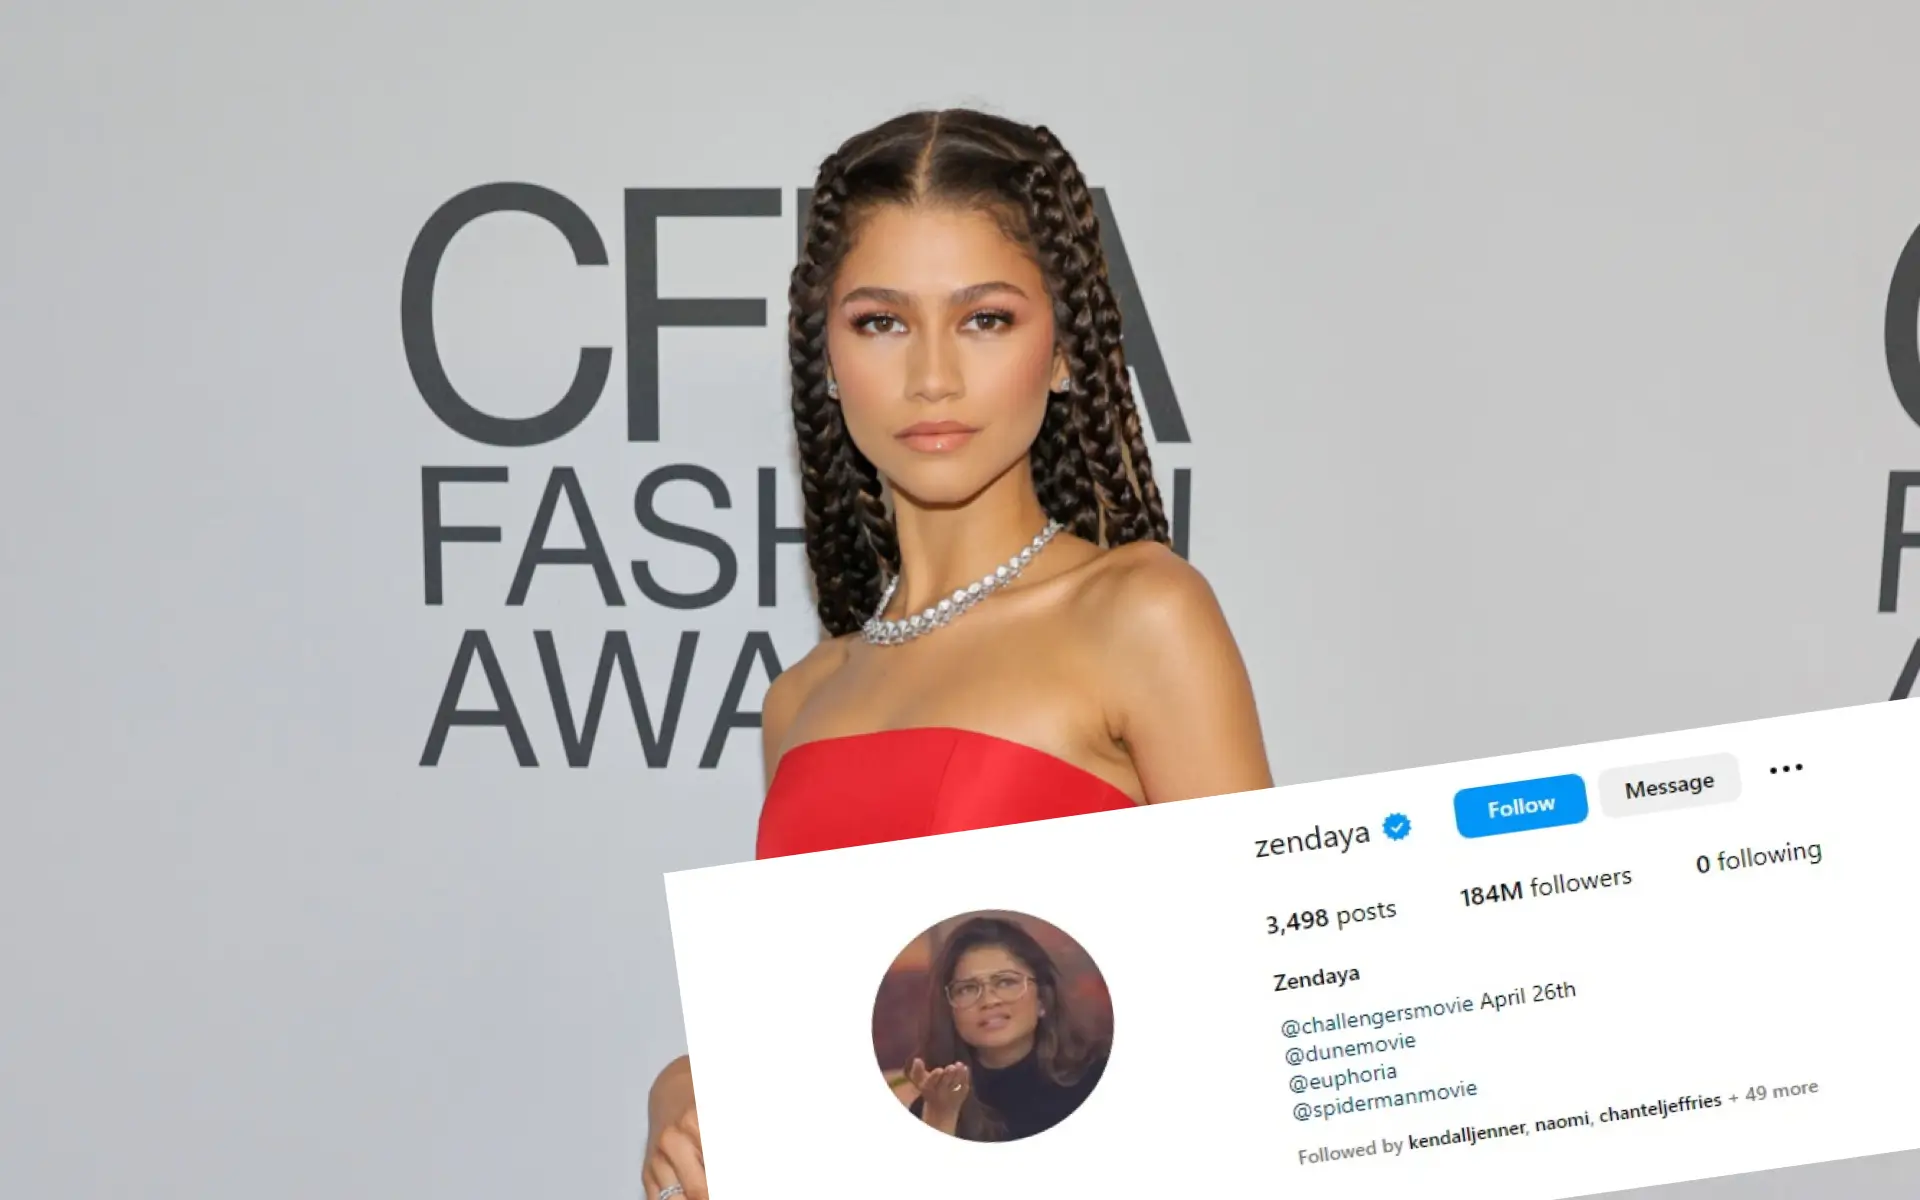 Zendaya Unfollows Everyone on Instagram: What Could It Mean?